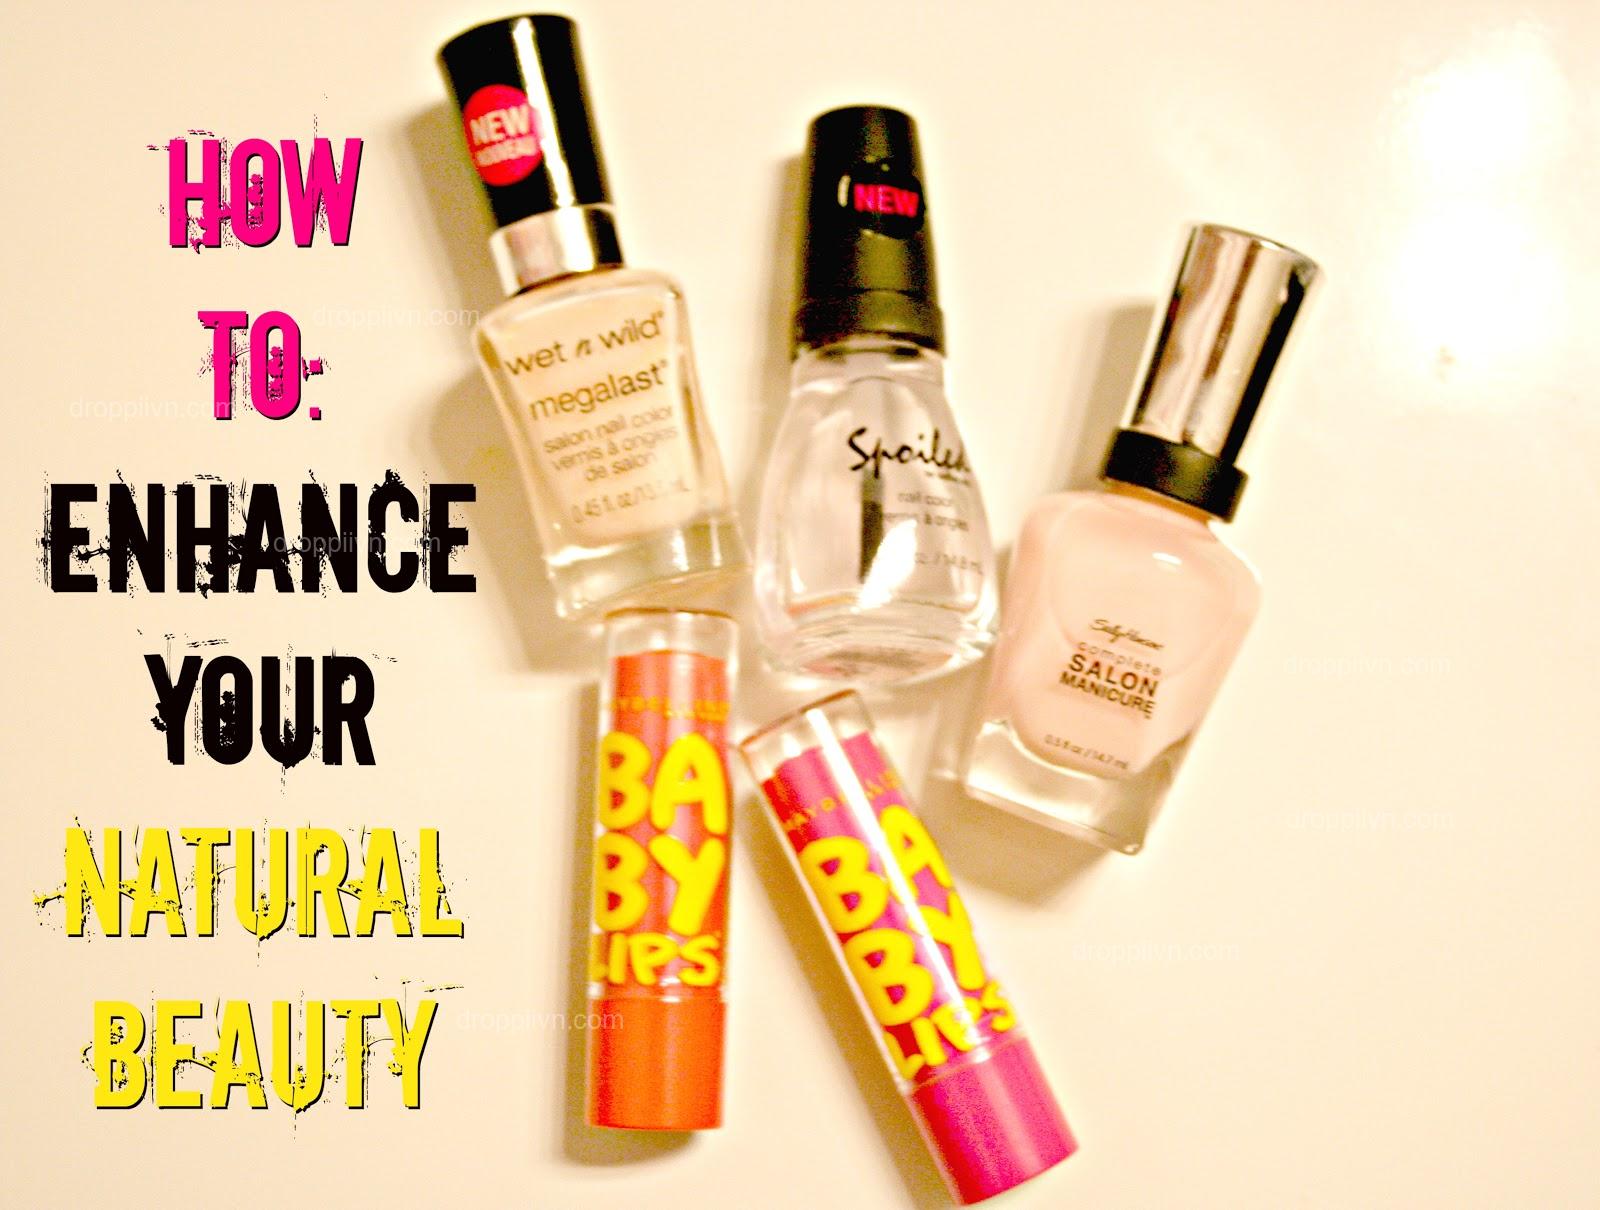 Natural ways to enhance your beauty